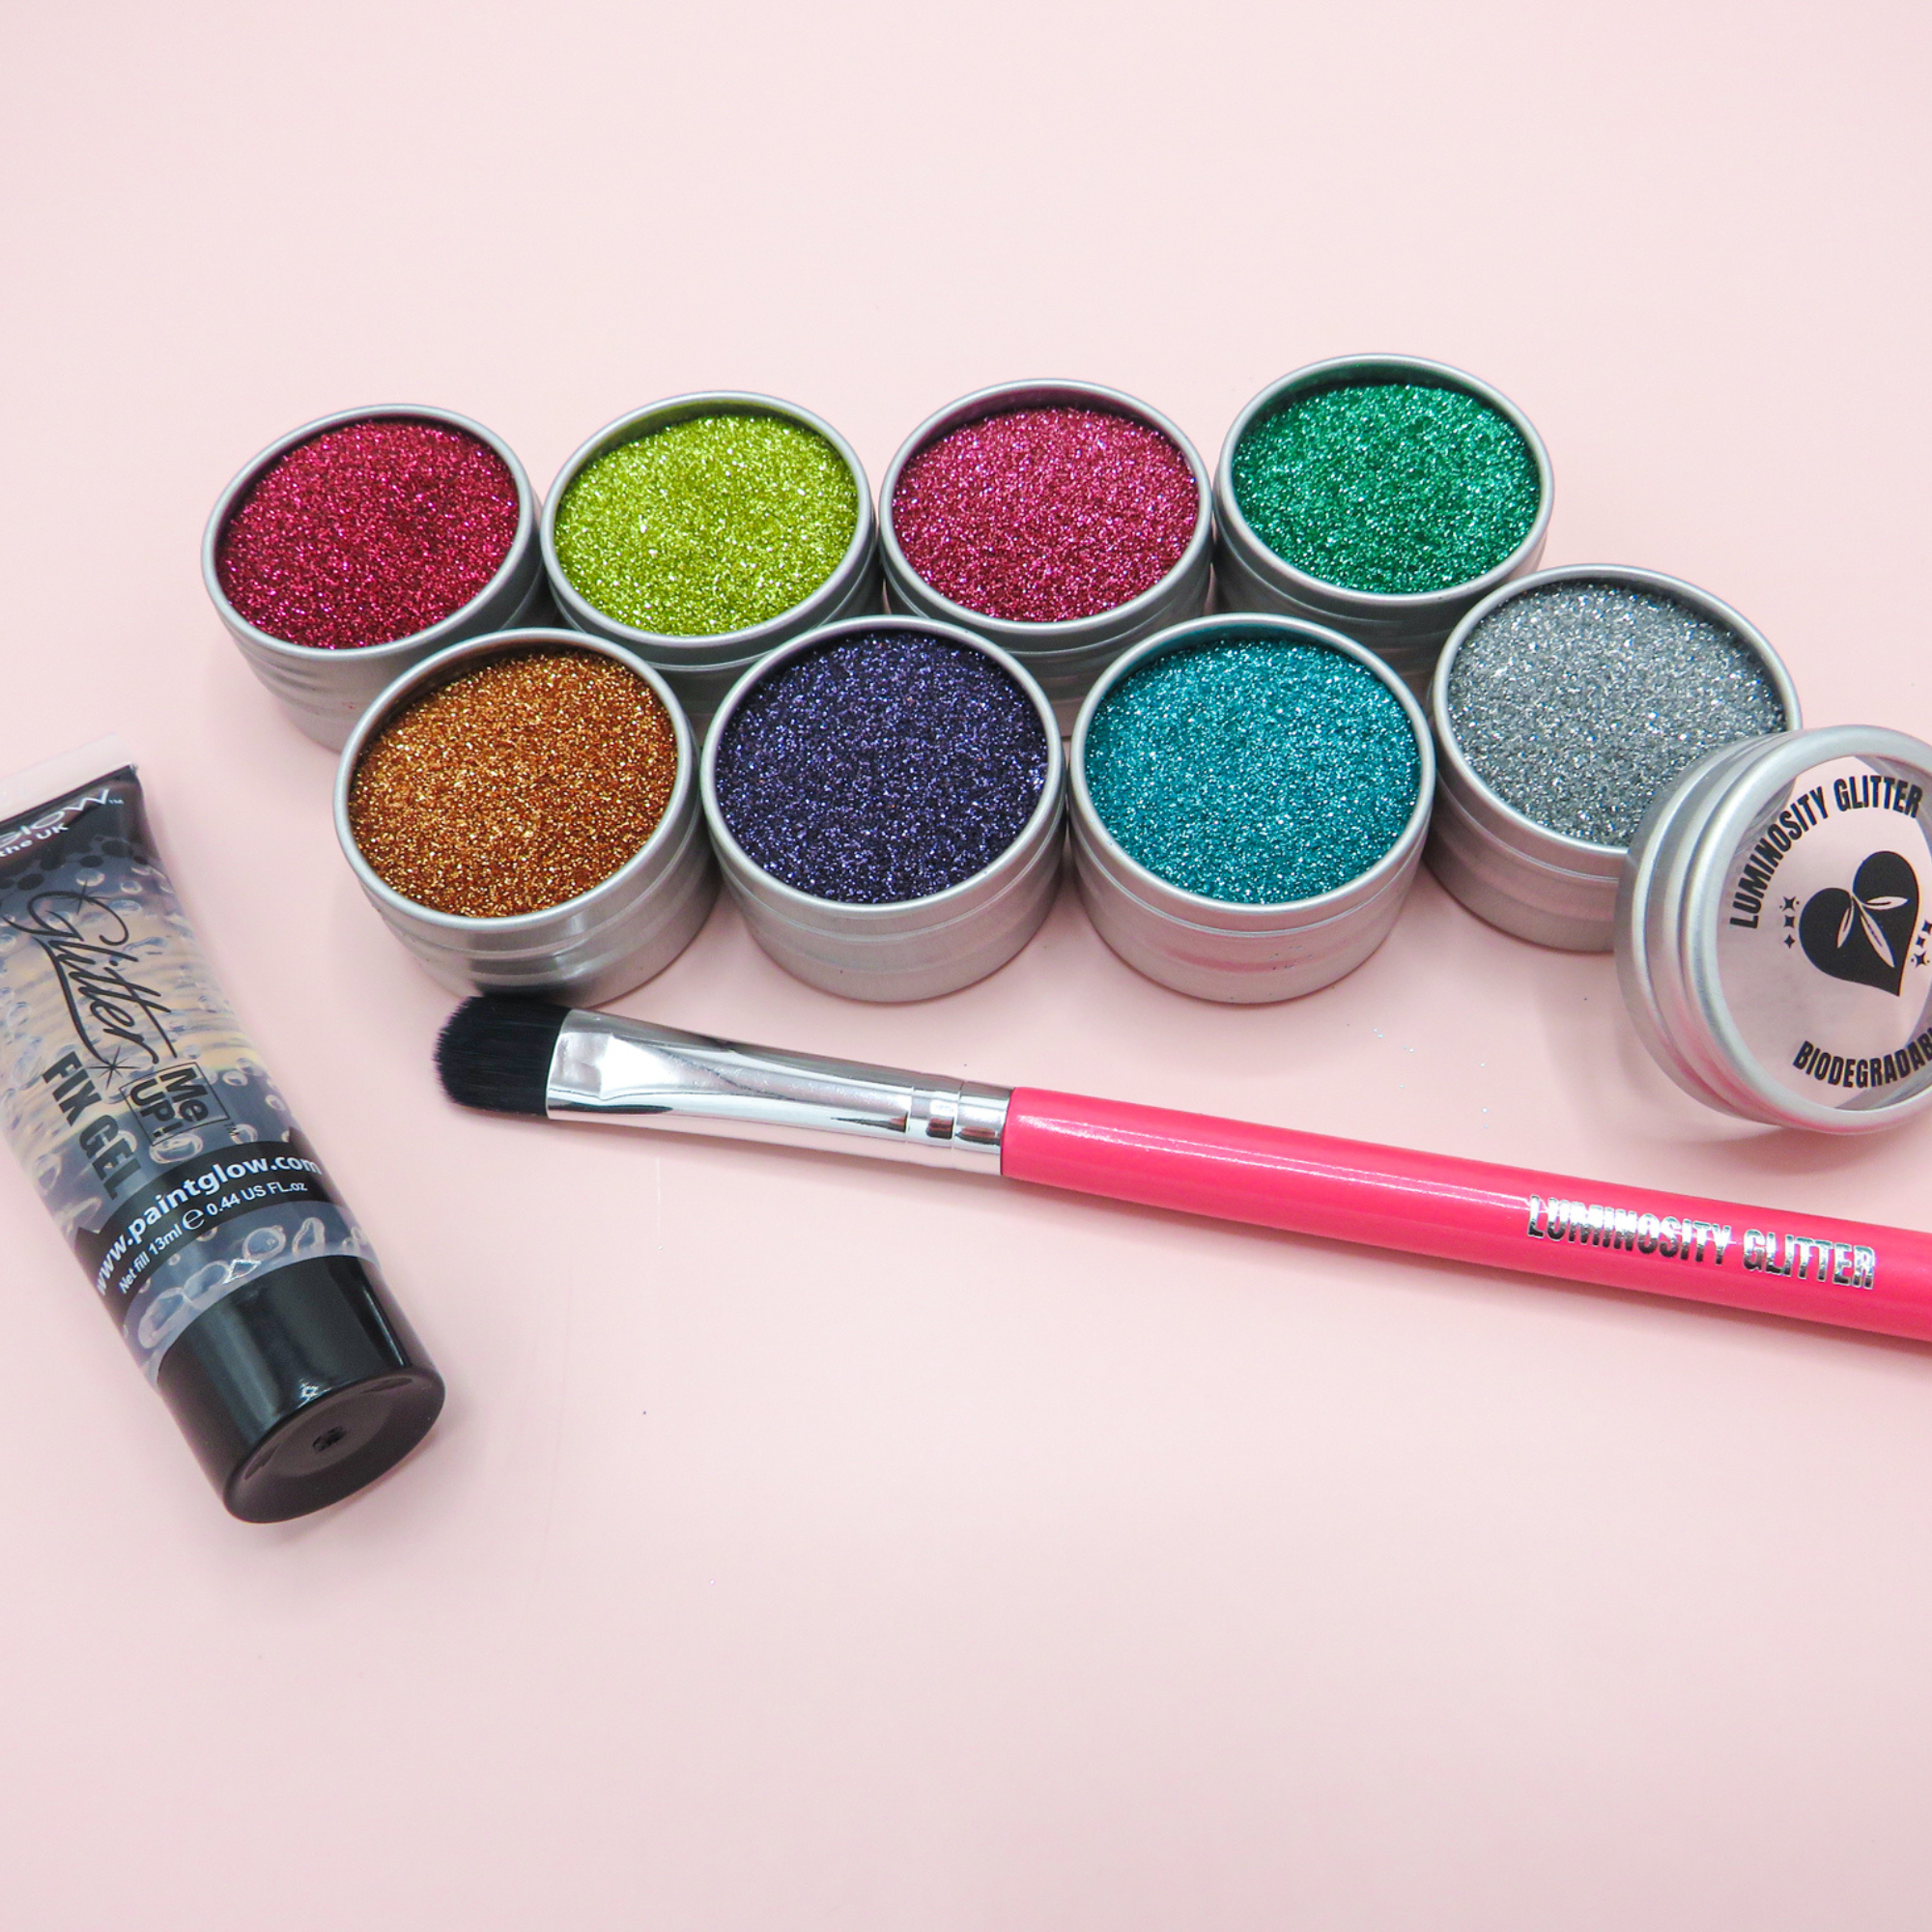 A fine set of eco glitters by luminosity glitter. Comes with a glitter fix gel and hot pink wooden makeup brush.